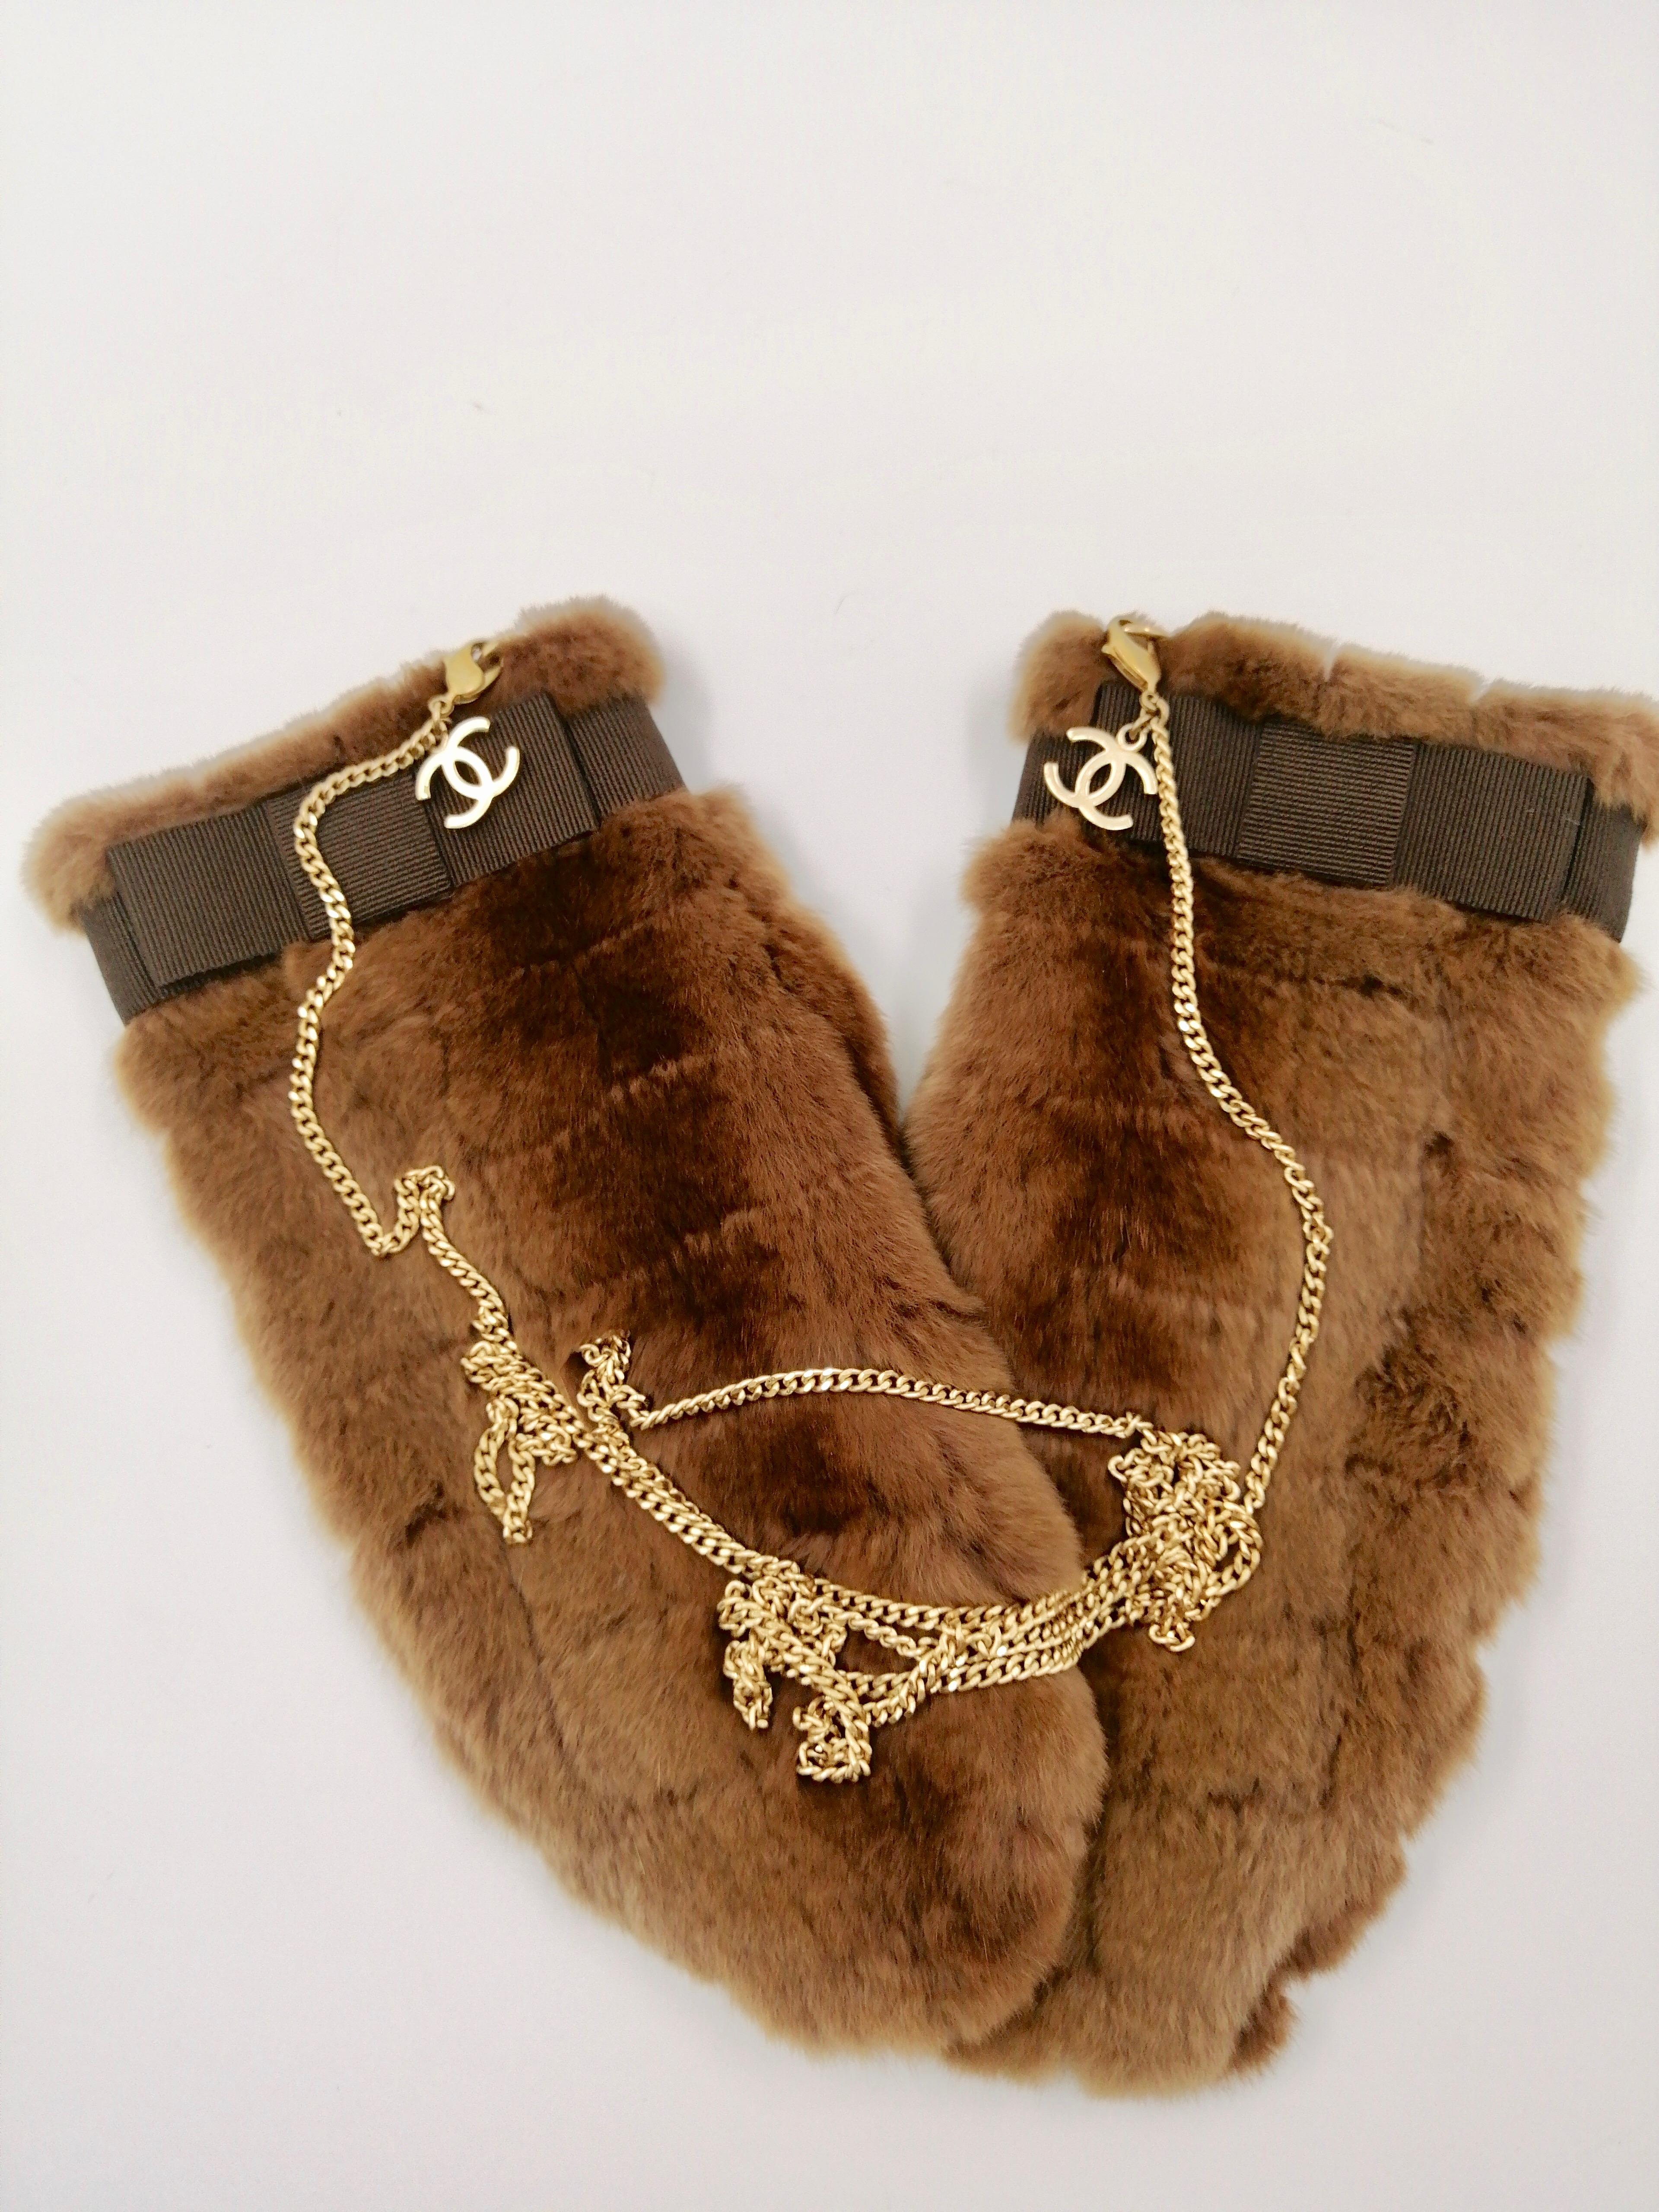 CHANEL fur gloves/mittens
Collection: Fall 2003
Chocolat bar quilted mittens/gloves in honey fur, ton sur ton gros grain ribbons, long golden metal chain.
Size M
Made in Belgium
Composition: 100% vizelle Lining 75% viscose, 25% silk 
Very good